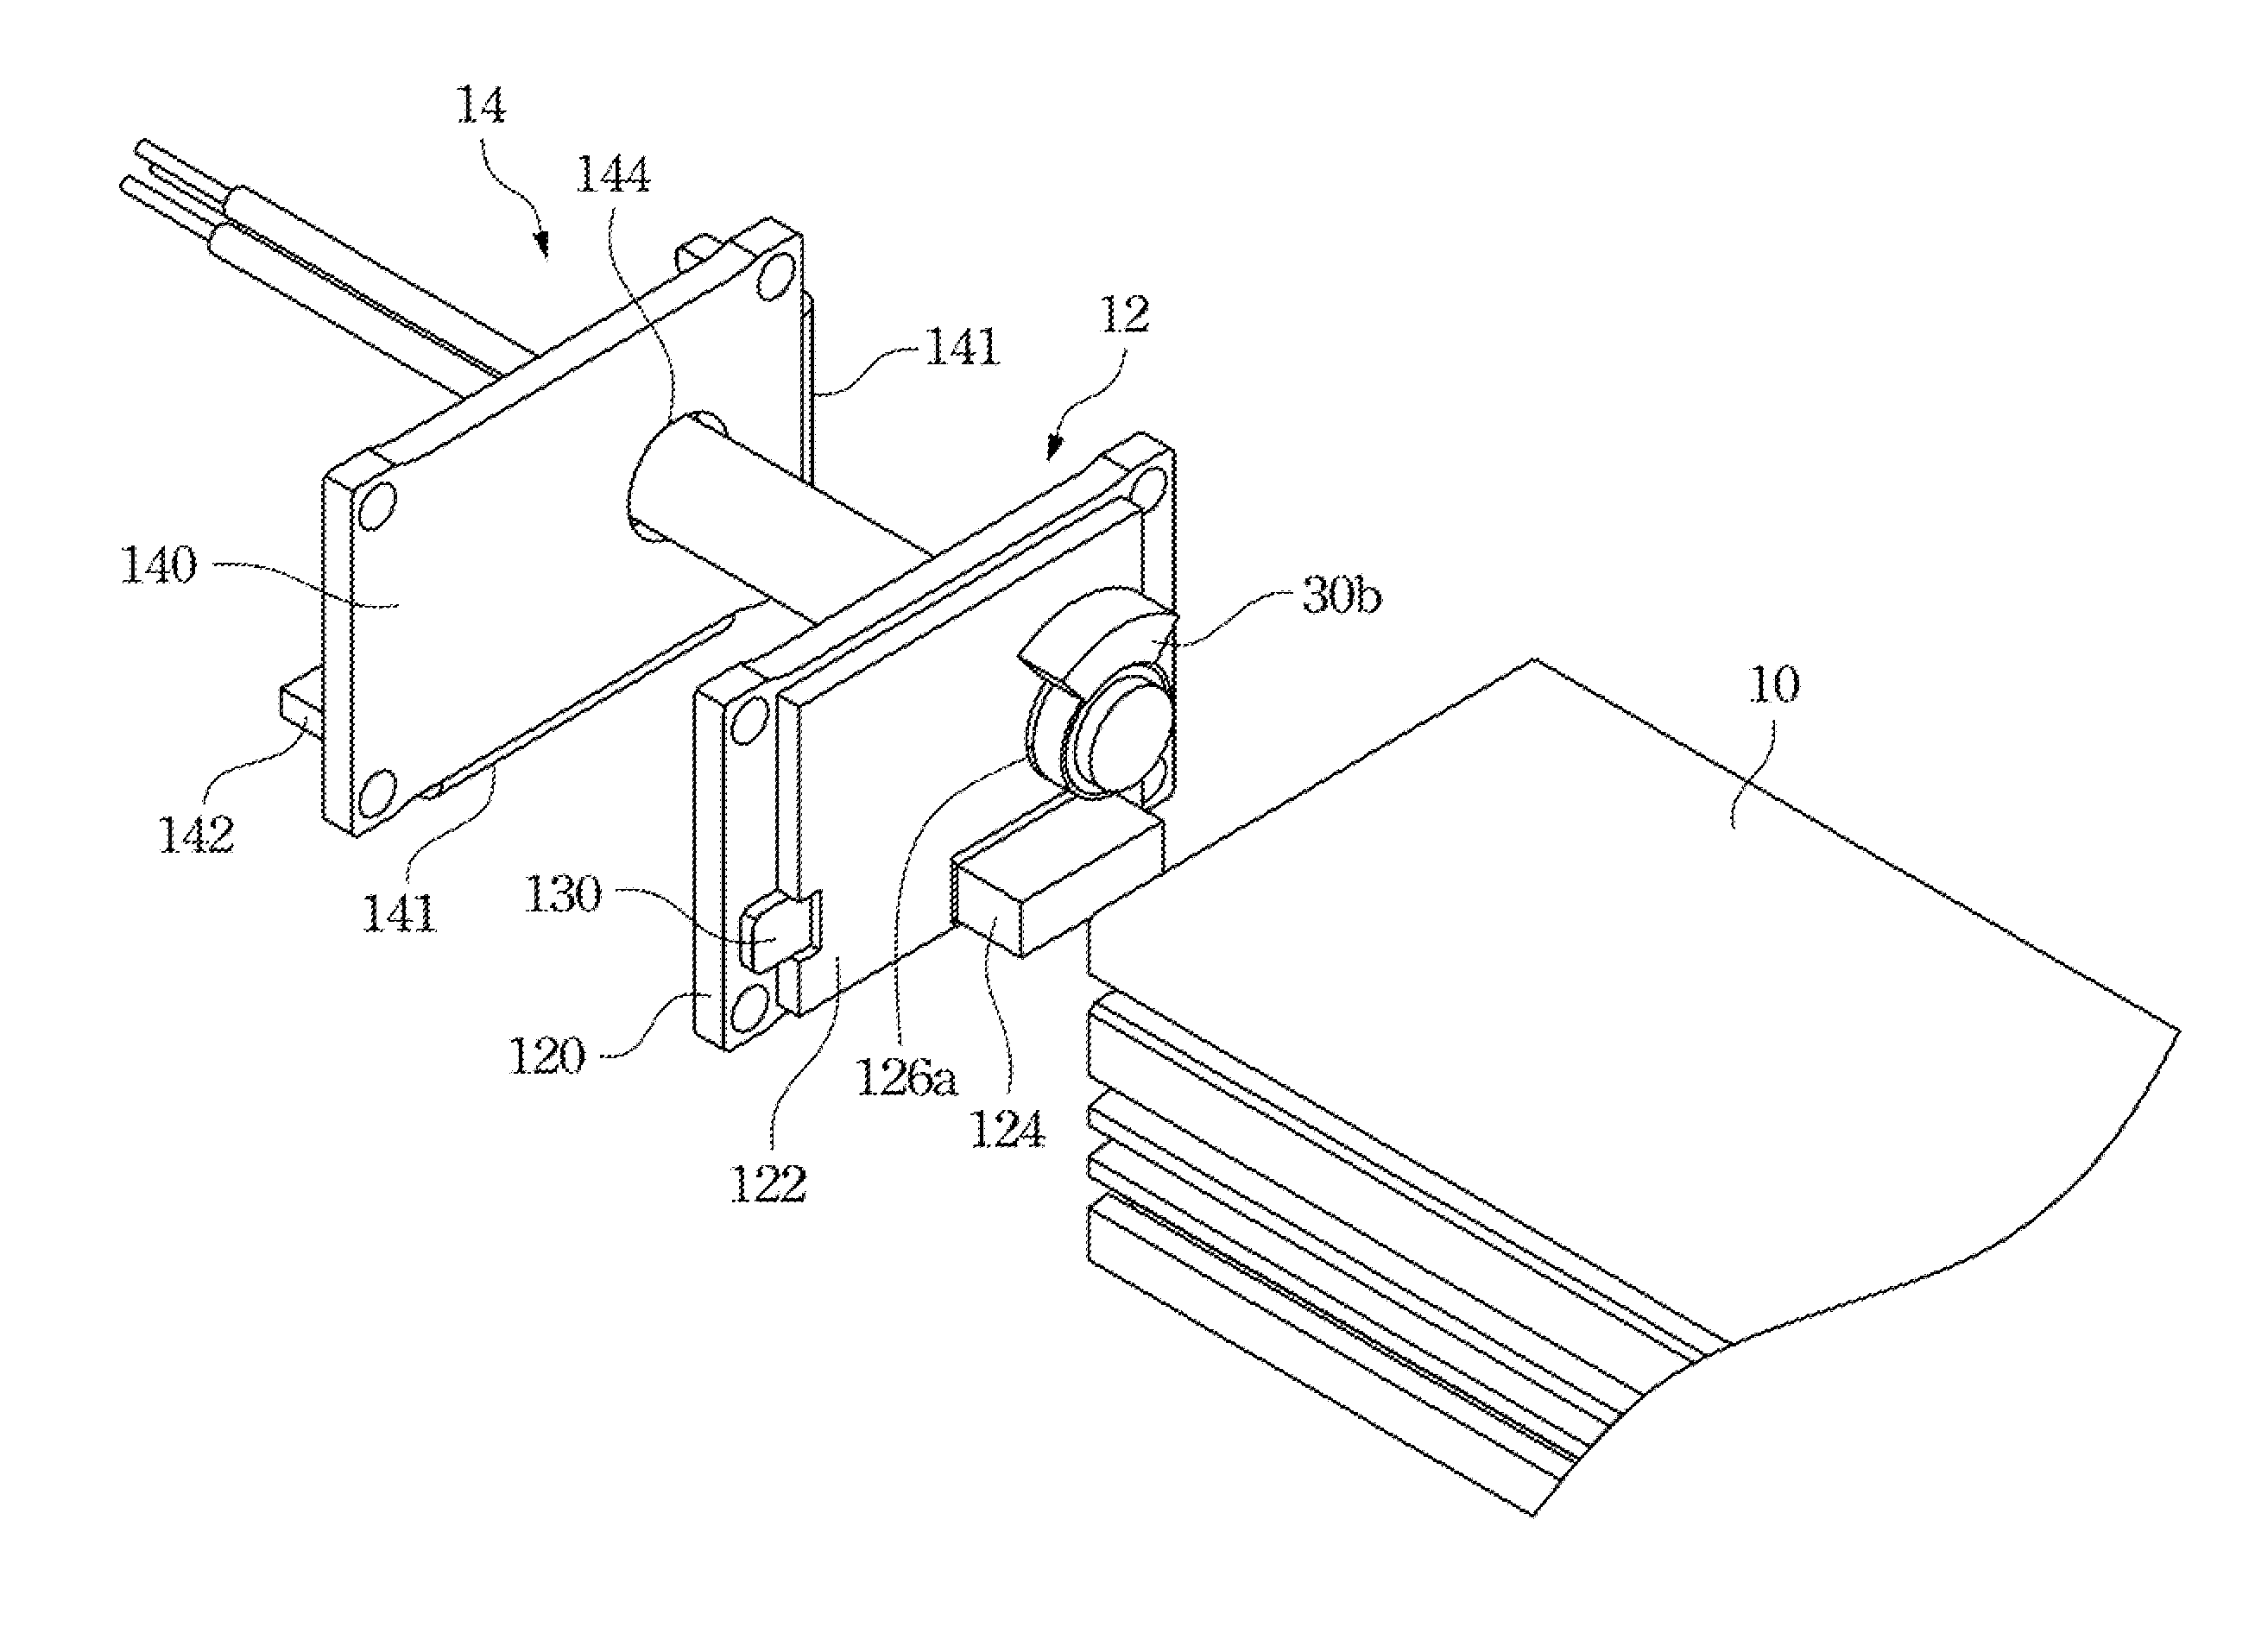 External structure of outdoor electronic apparatus